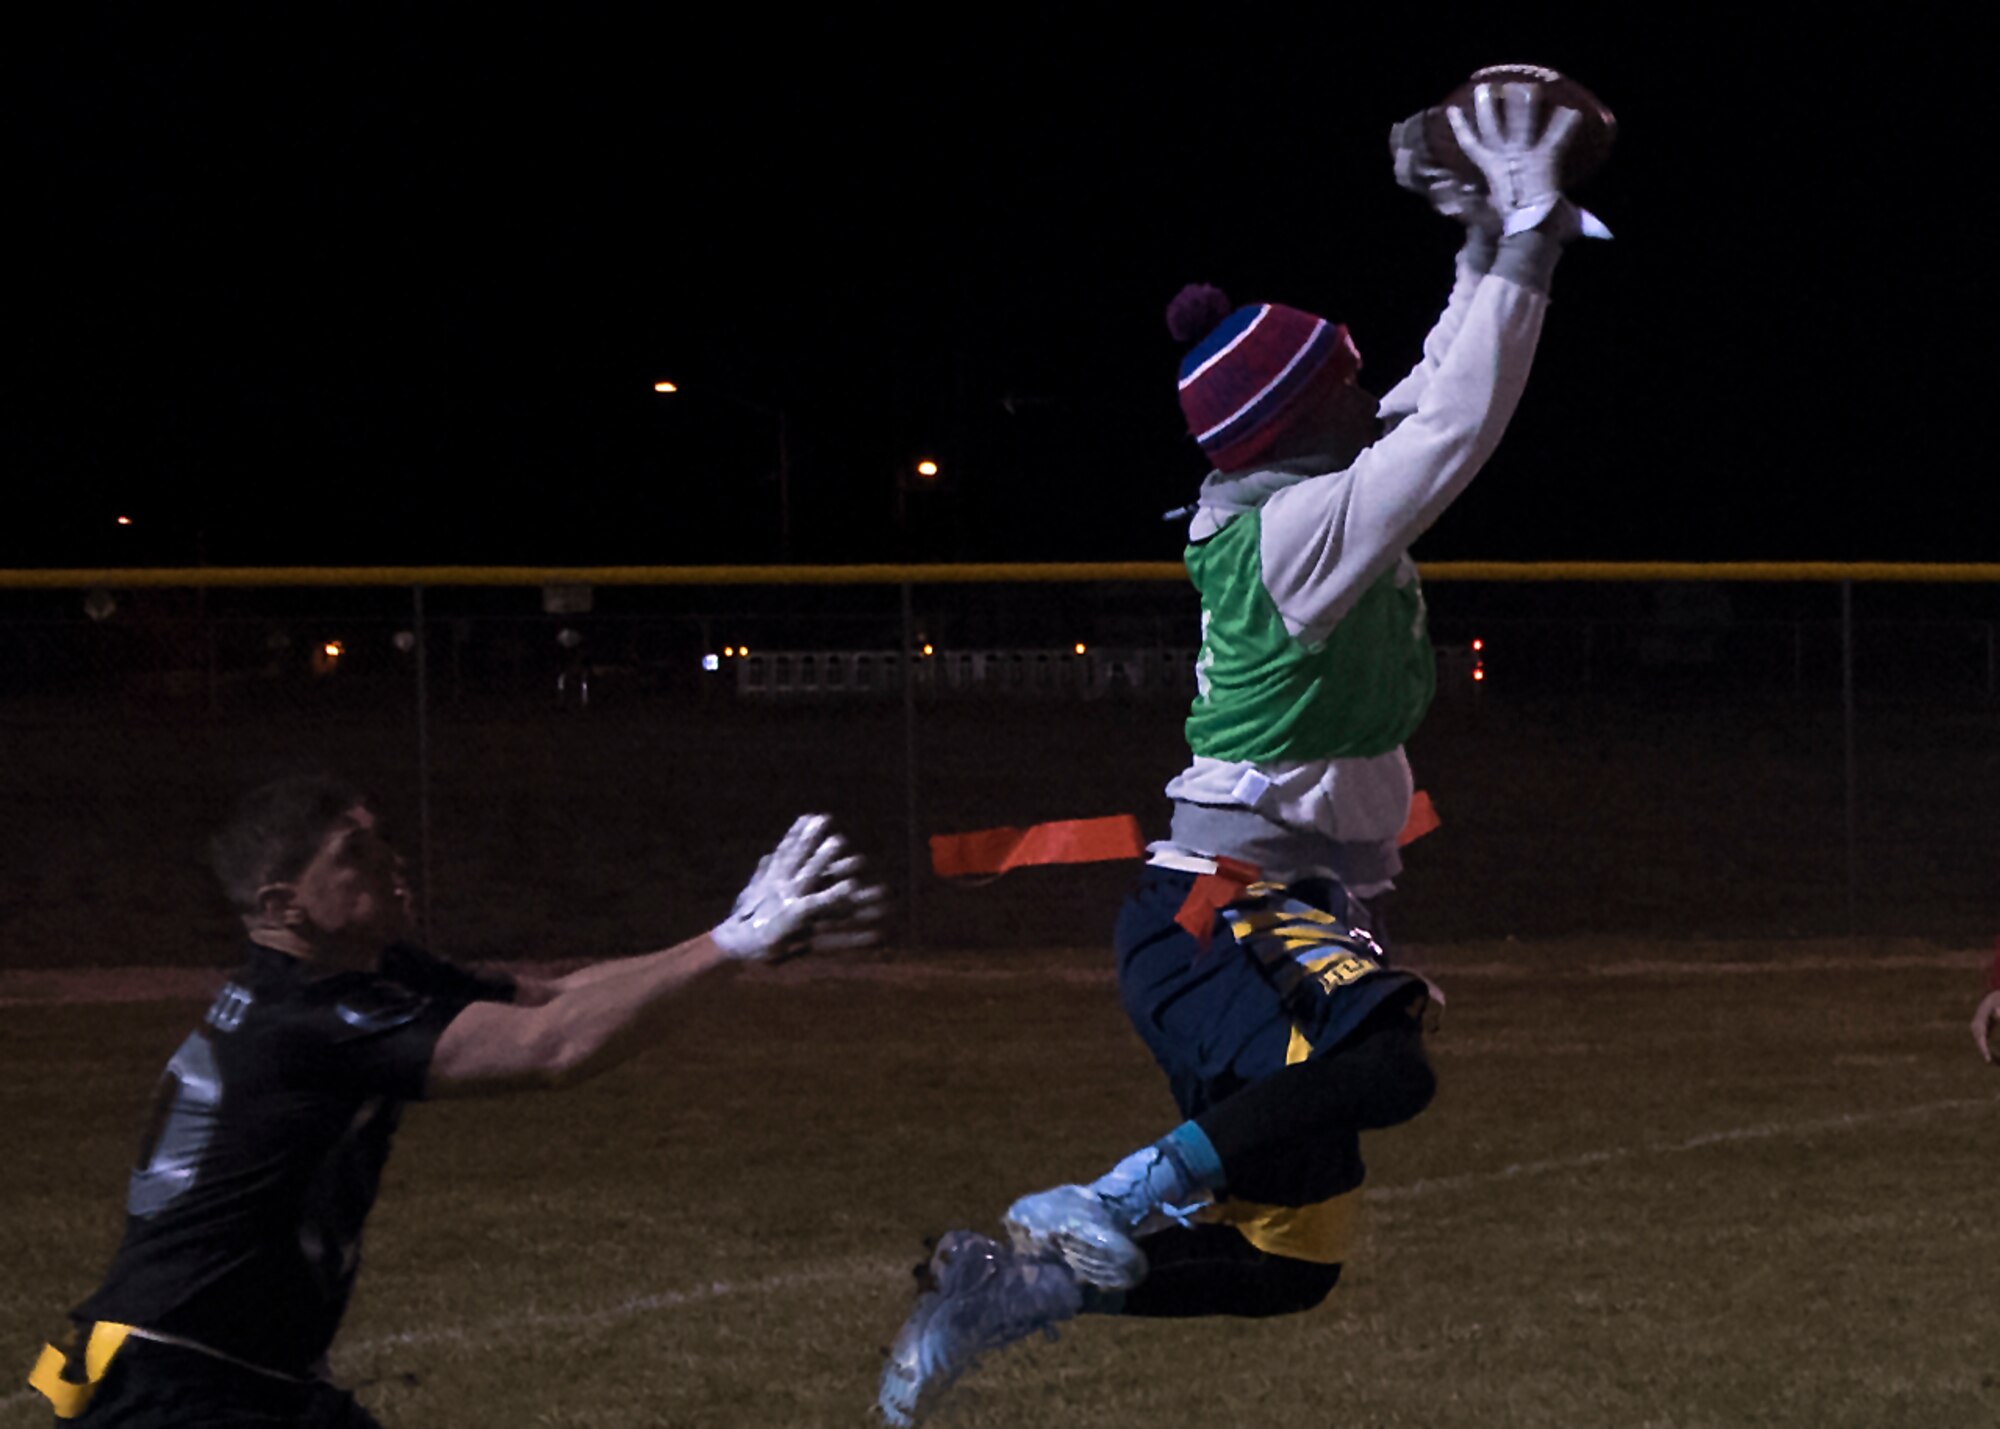 Christopher Marshall, 90th Maintenance group and 20th Air Force intramural flag football team member, catches a pass during the championship game at F.E. Warren Air Force Base, Wyo., Oct. 19, 2016. The playoffs were a double elimination tournament, forcing a second championship game between the two teams. (U.S. Air Force photo by Senior Airman Brandon Valle)